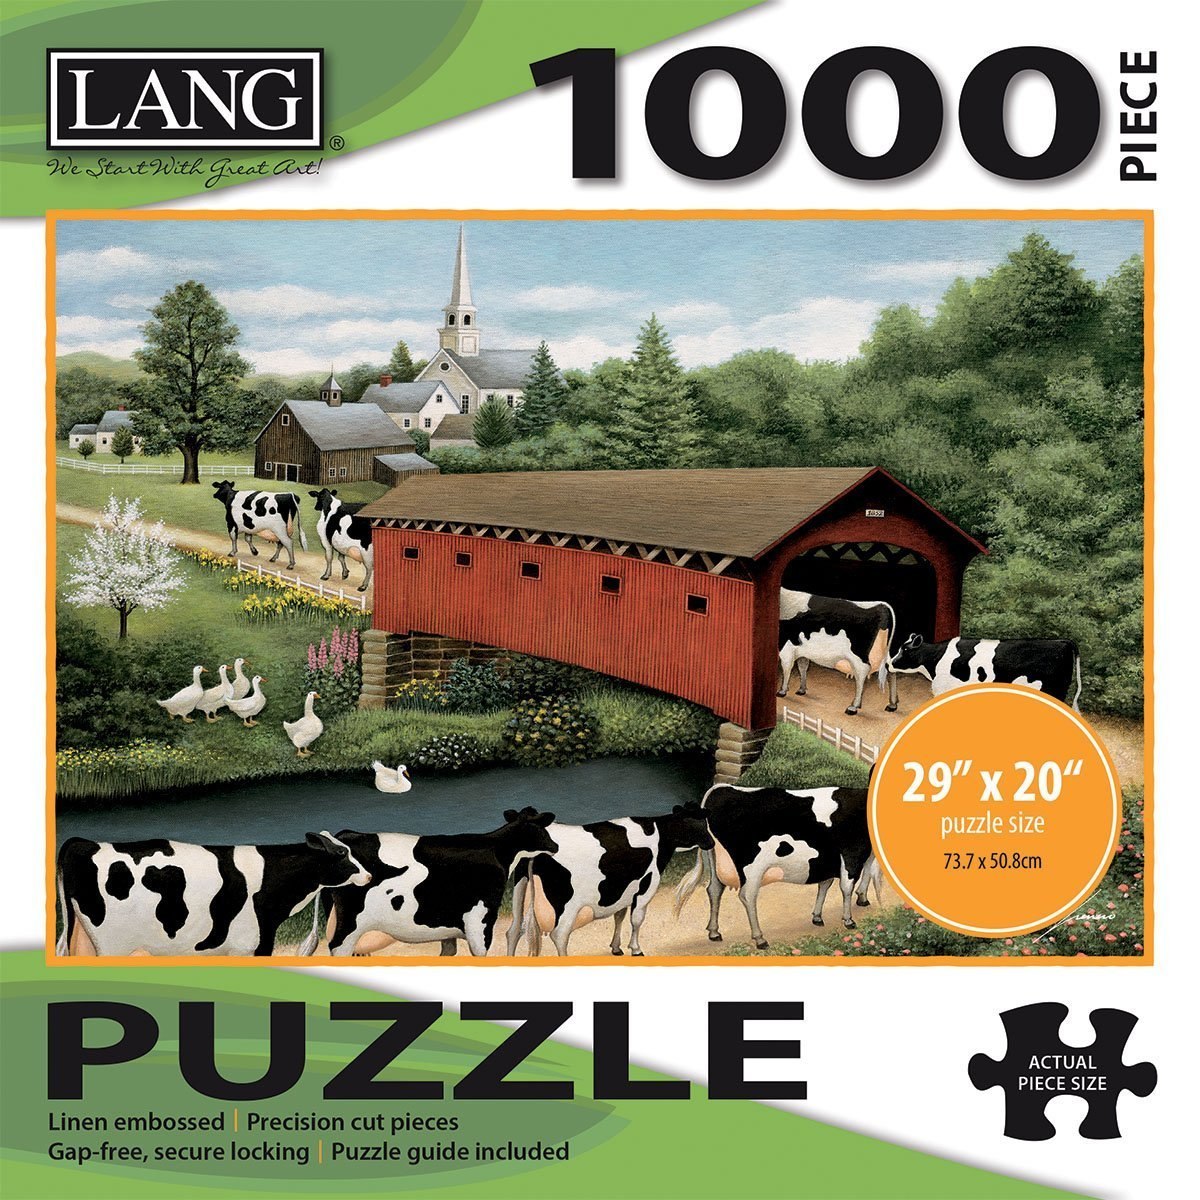 Cows Cows Cows - 1000pc Jigsaw Puzzle by Lang  			  					NEW - image 1